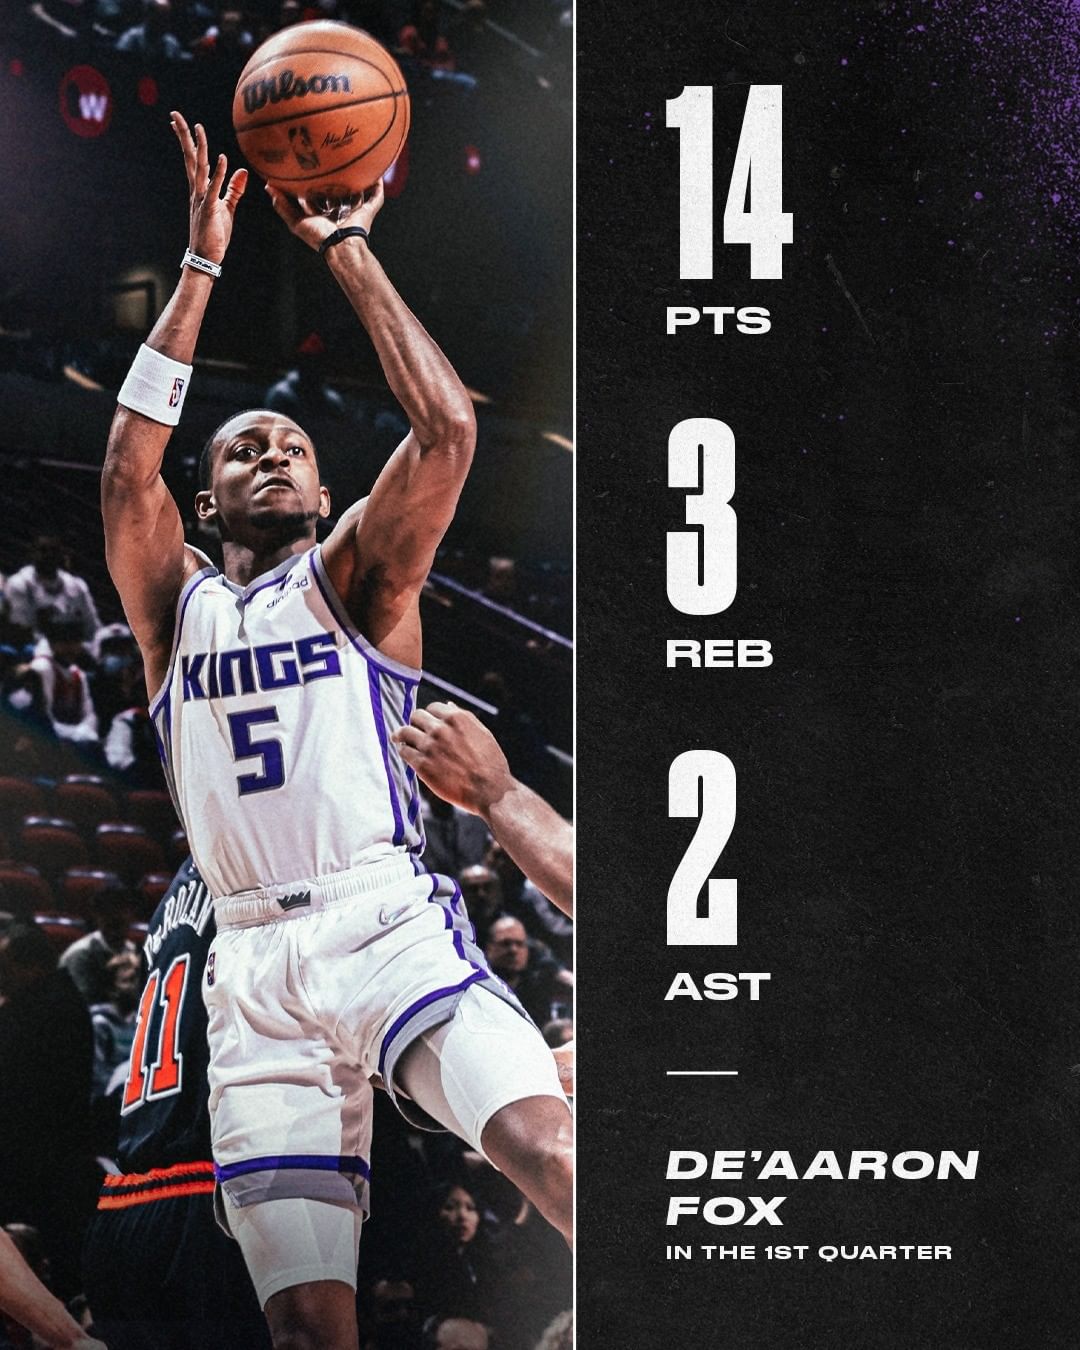 An eventful first quarter for De'Aaron Fox   
  
He finishes the first 12 minute...